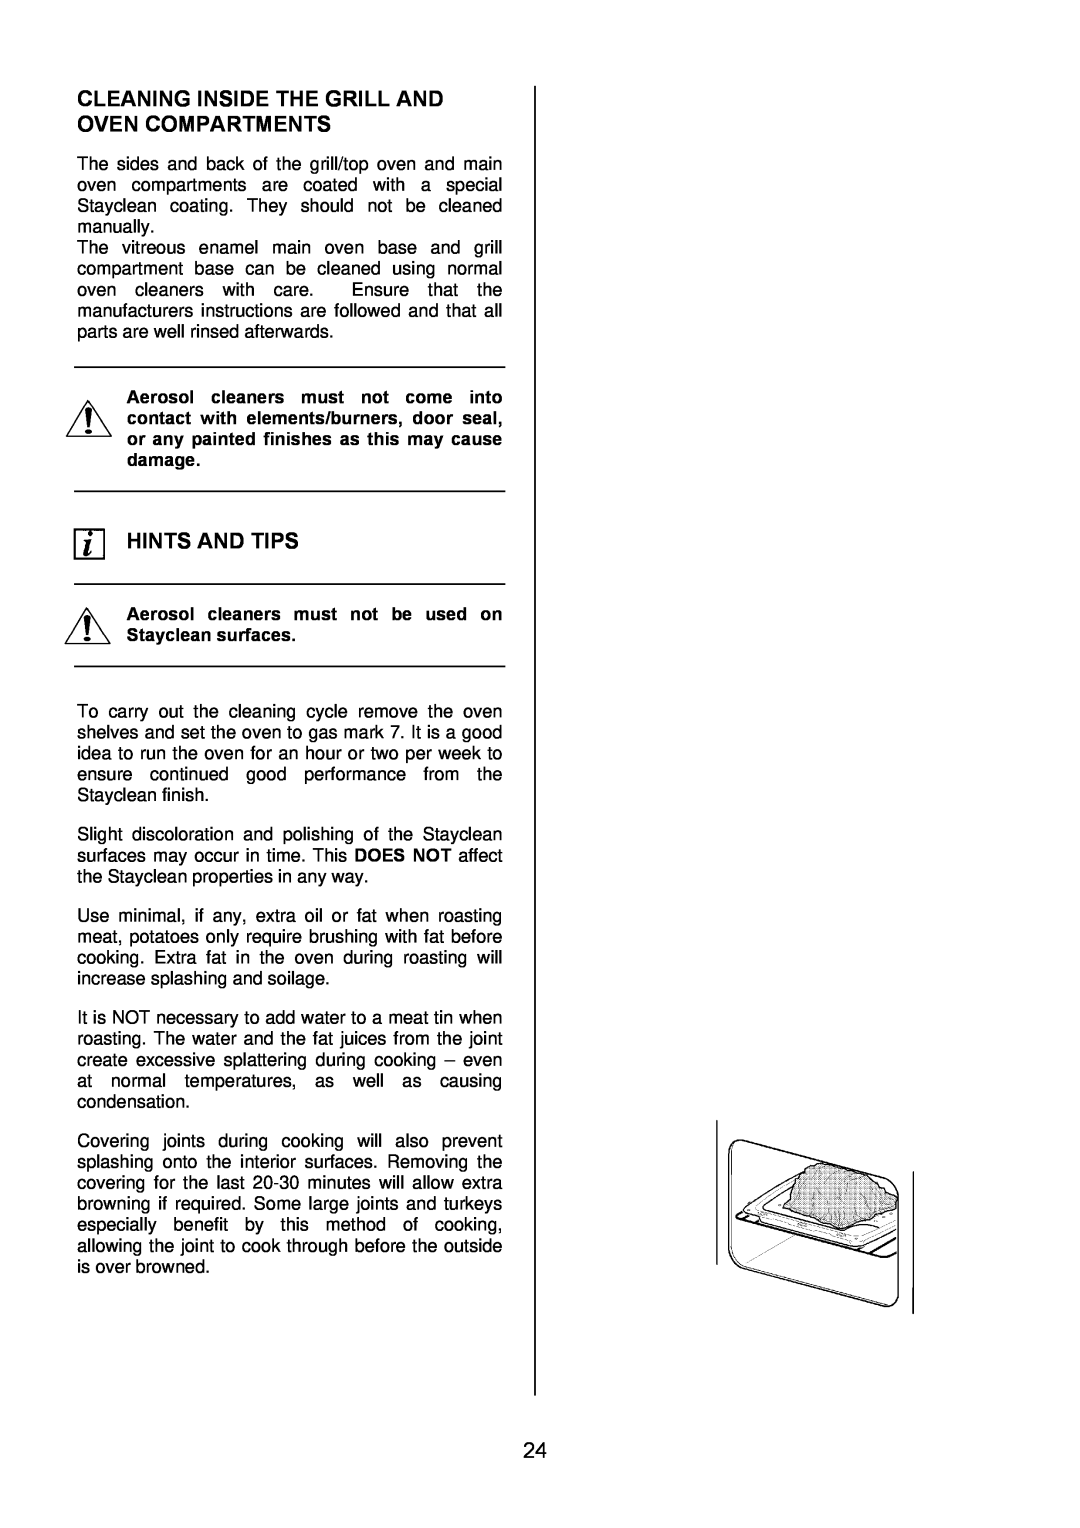 Electrolux EIKG6047, EIKG6046 user manual Cleaning Inside The Grill And Oven Compartments, Hints And Tips 